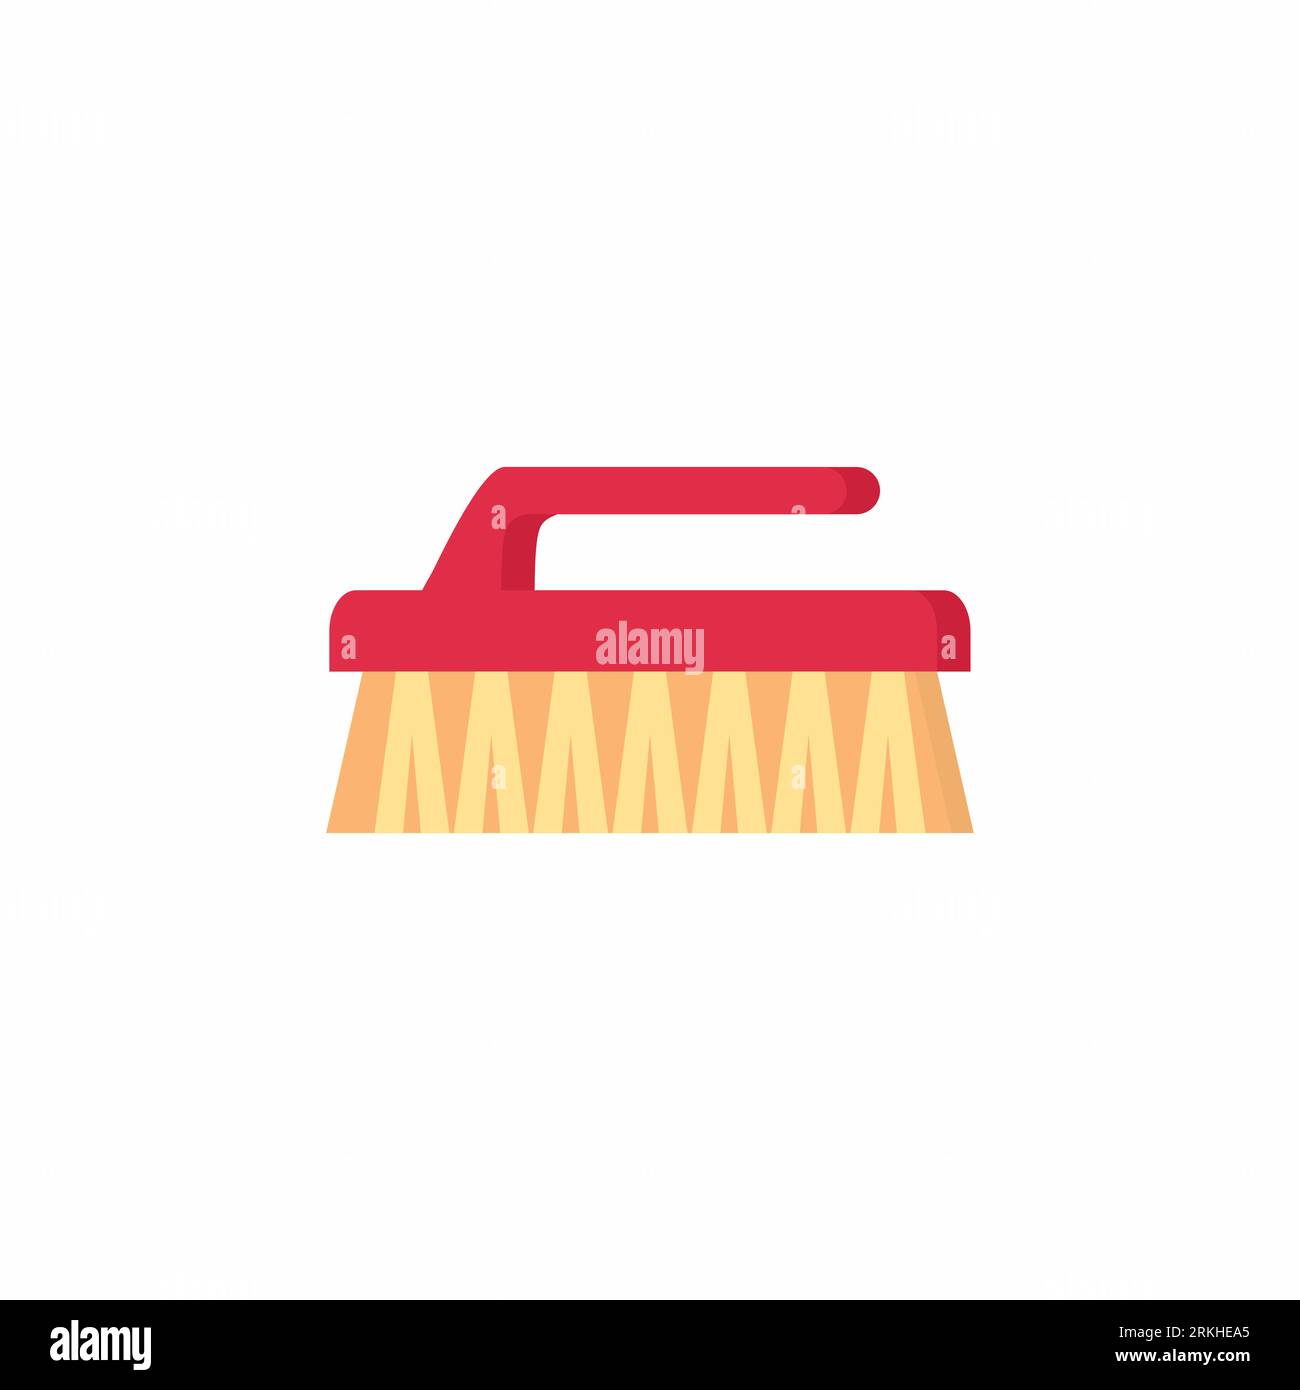 Red brush for cleaning icon in flat style. House cleaning concept with cartoon design element. Household supplies. Flat vector scrub brush. Clean symb Stock Vector